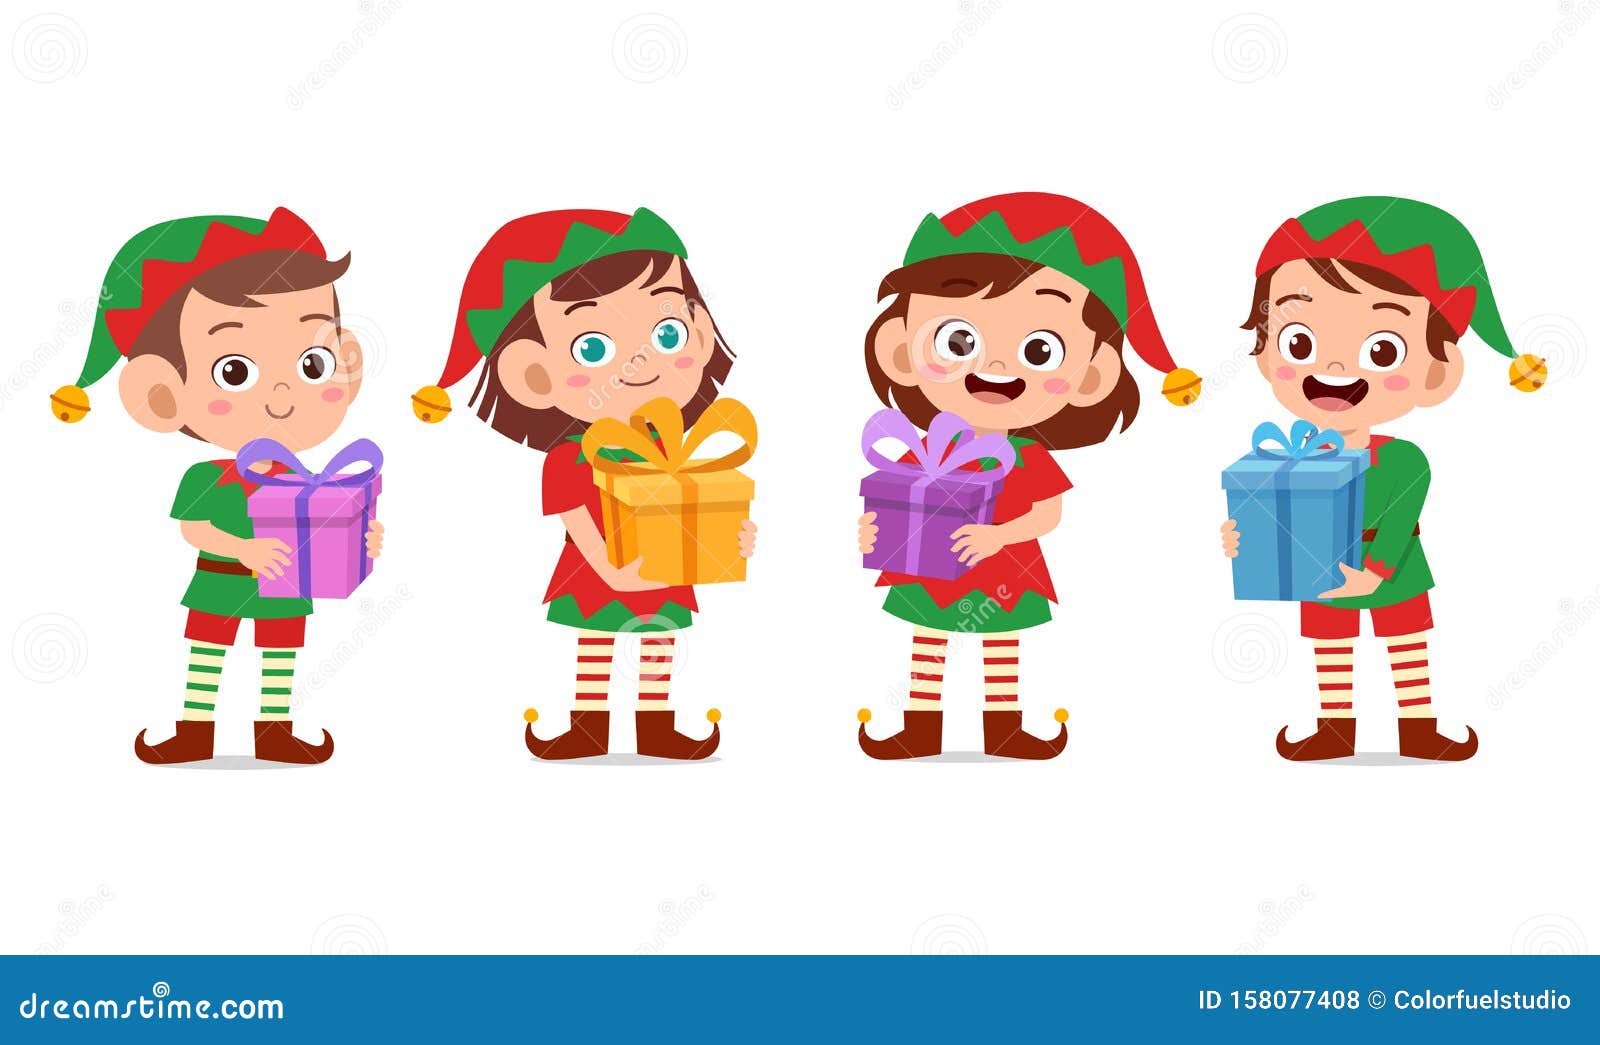 Kids Carry Stock Illustrations 1 032 Kids Carry Stock Illustrations Vectors Clipart Dreamstime,How To Remove Ink Stains From Dryer